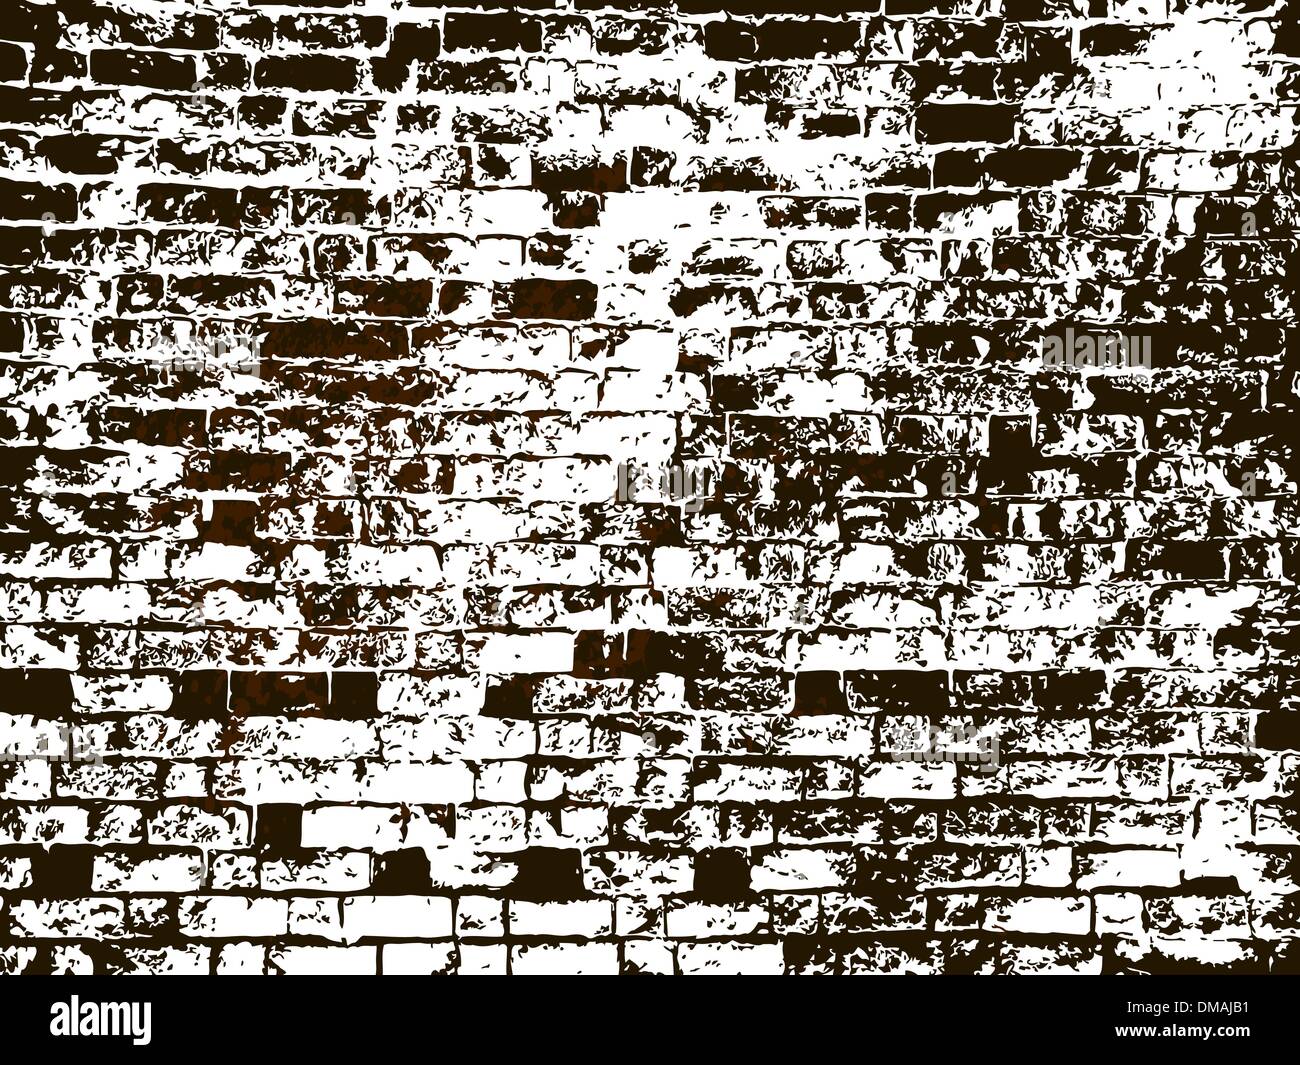 Abstract grunge brick wall with stains. EPS 8 Stock Vector